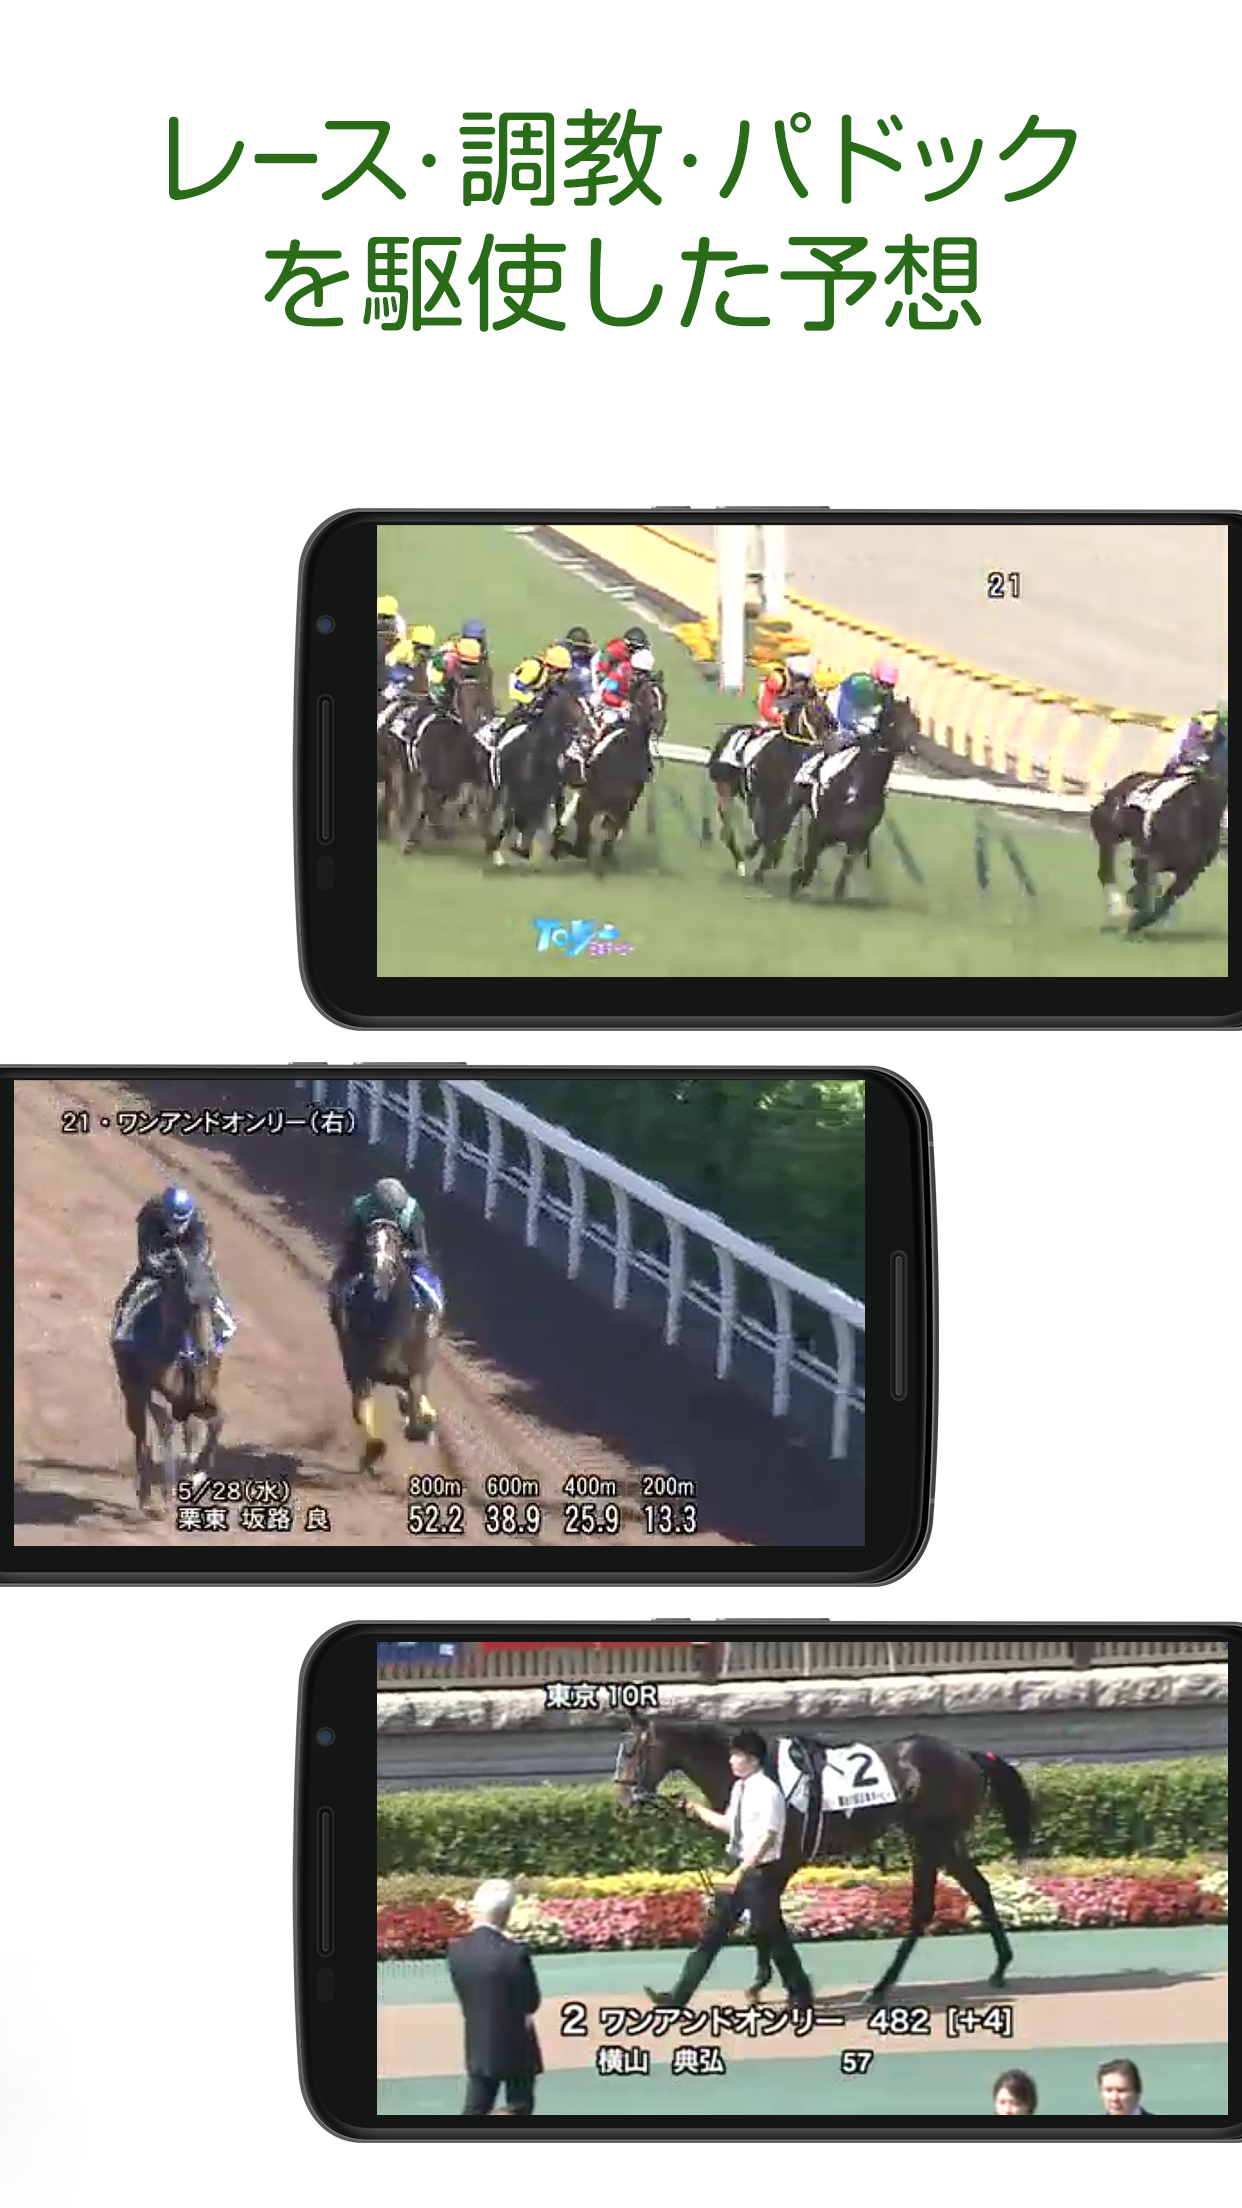 Android application JRA-VAN競馬情報 for Android screenshort